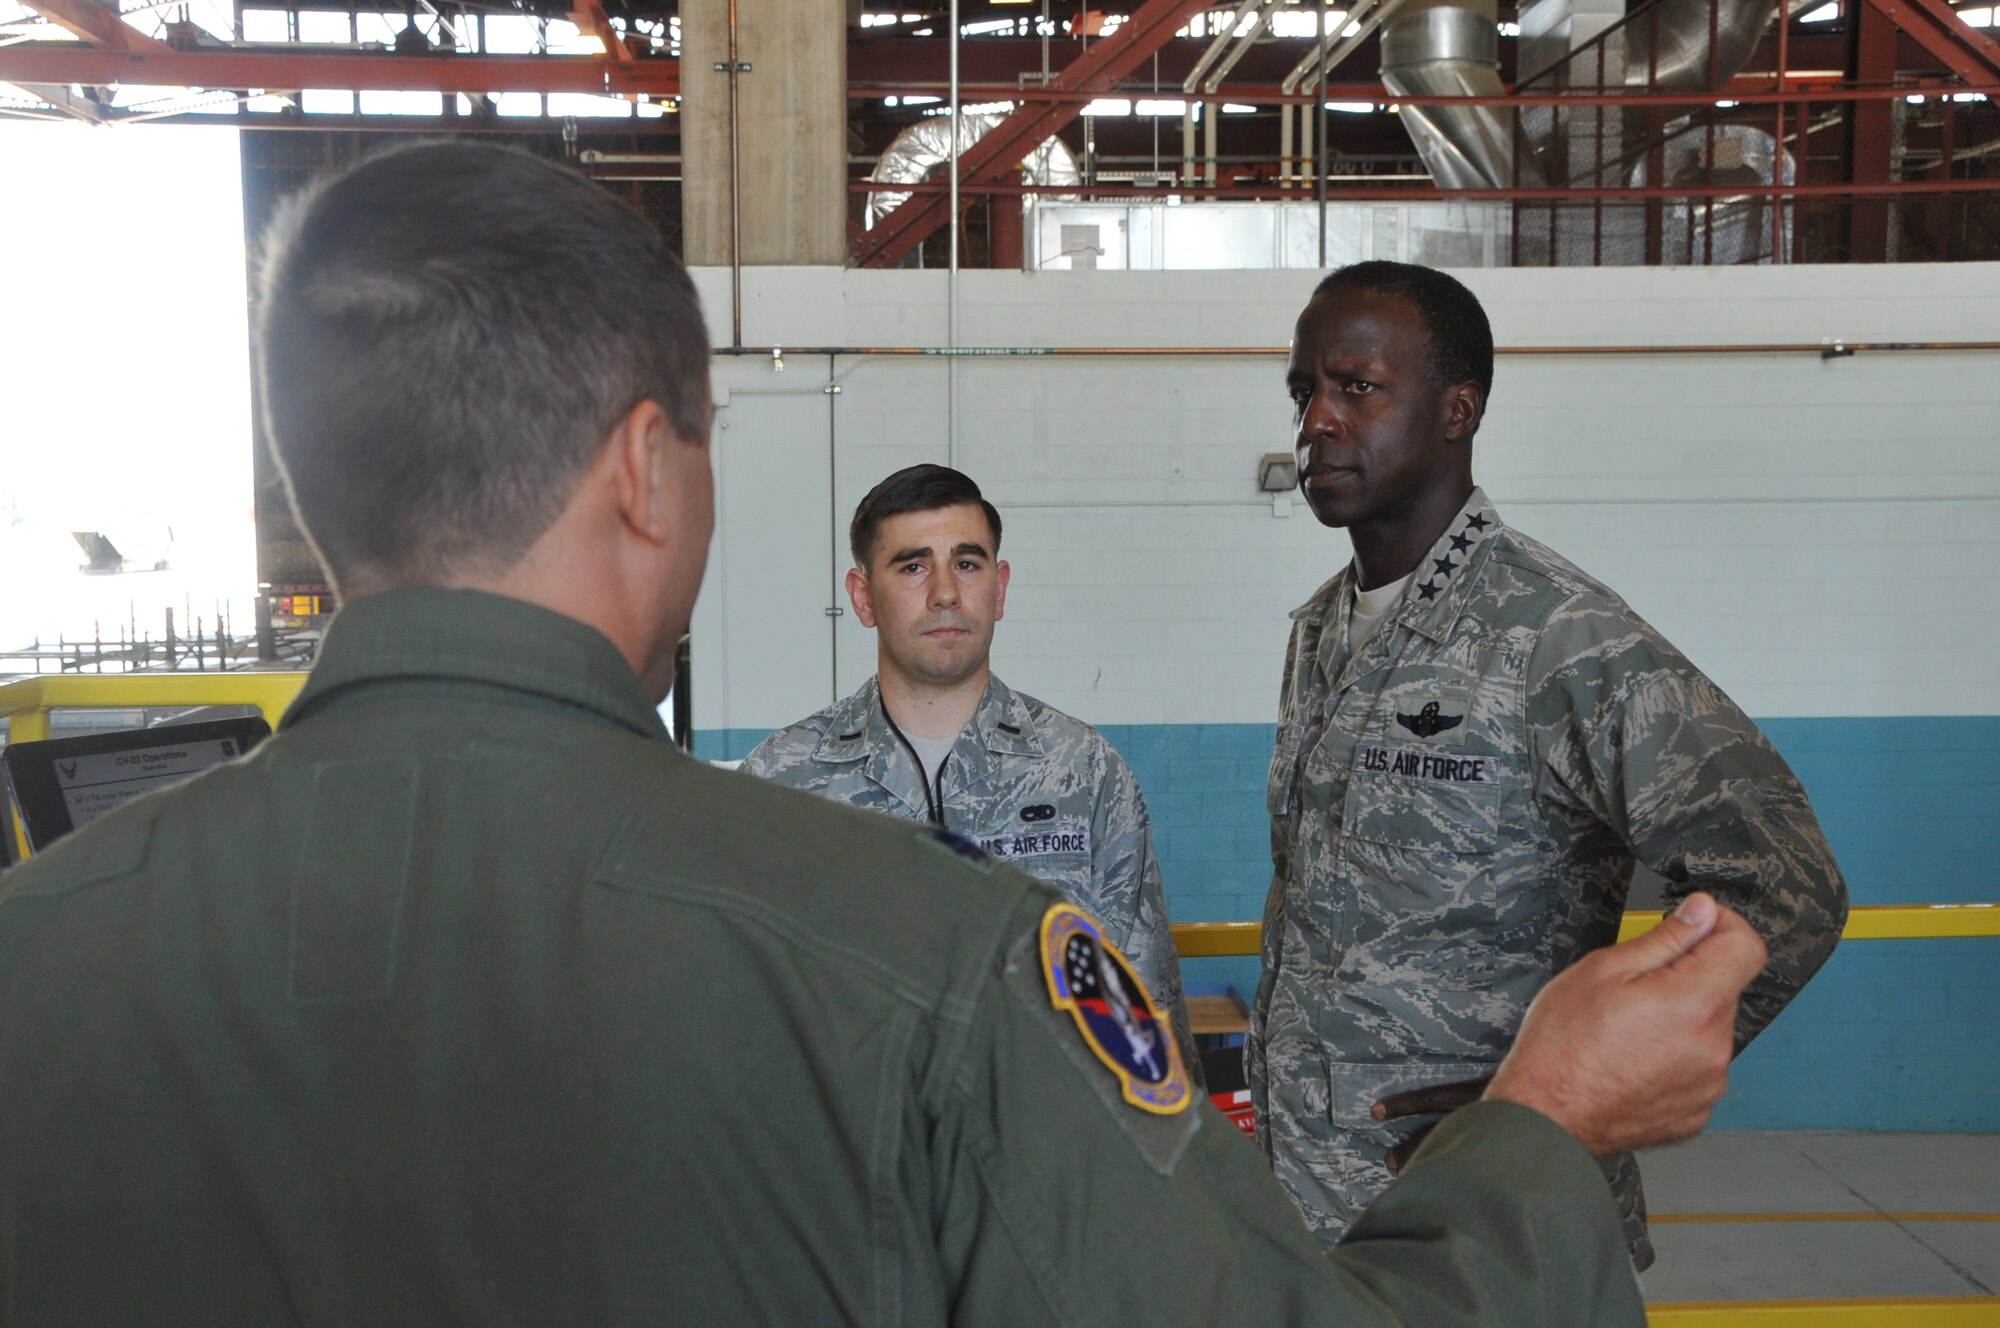 Lt. Col. Steven Breeze, 71st Special Operations Squadron commander, foreground, and 1st Lt. Shawn Cox, 58th Aircraft Maintenance Squadron, center, brief Gen. Edward A Rice Jr., AETC commander, during his visit to Kirtland AFB.